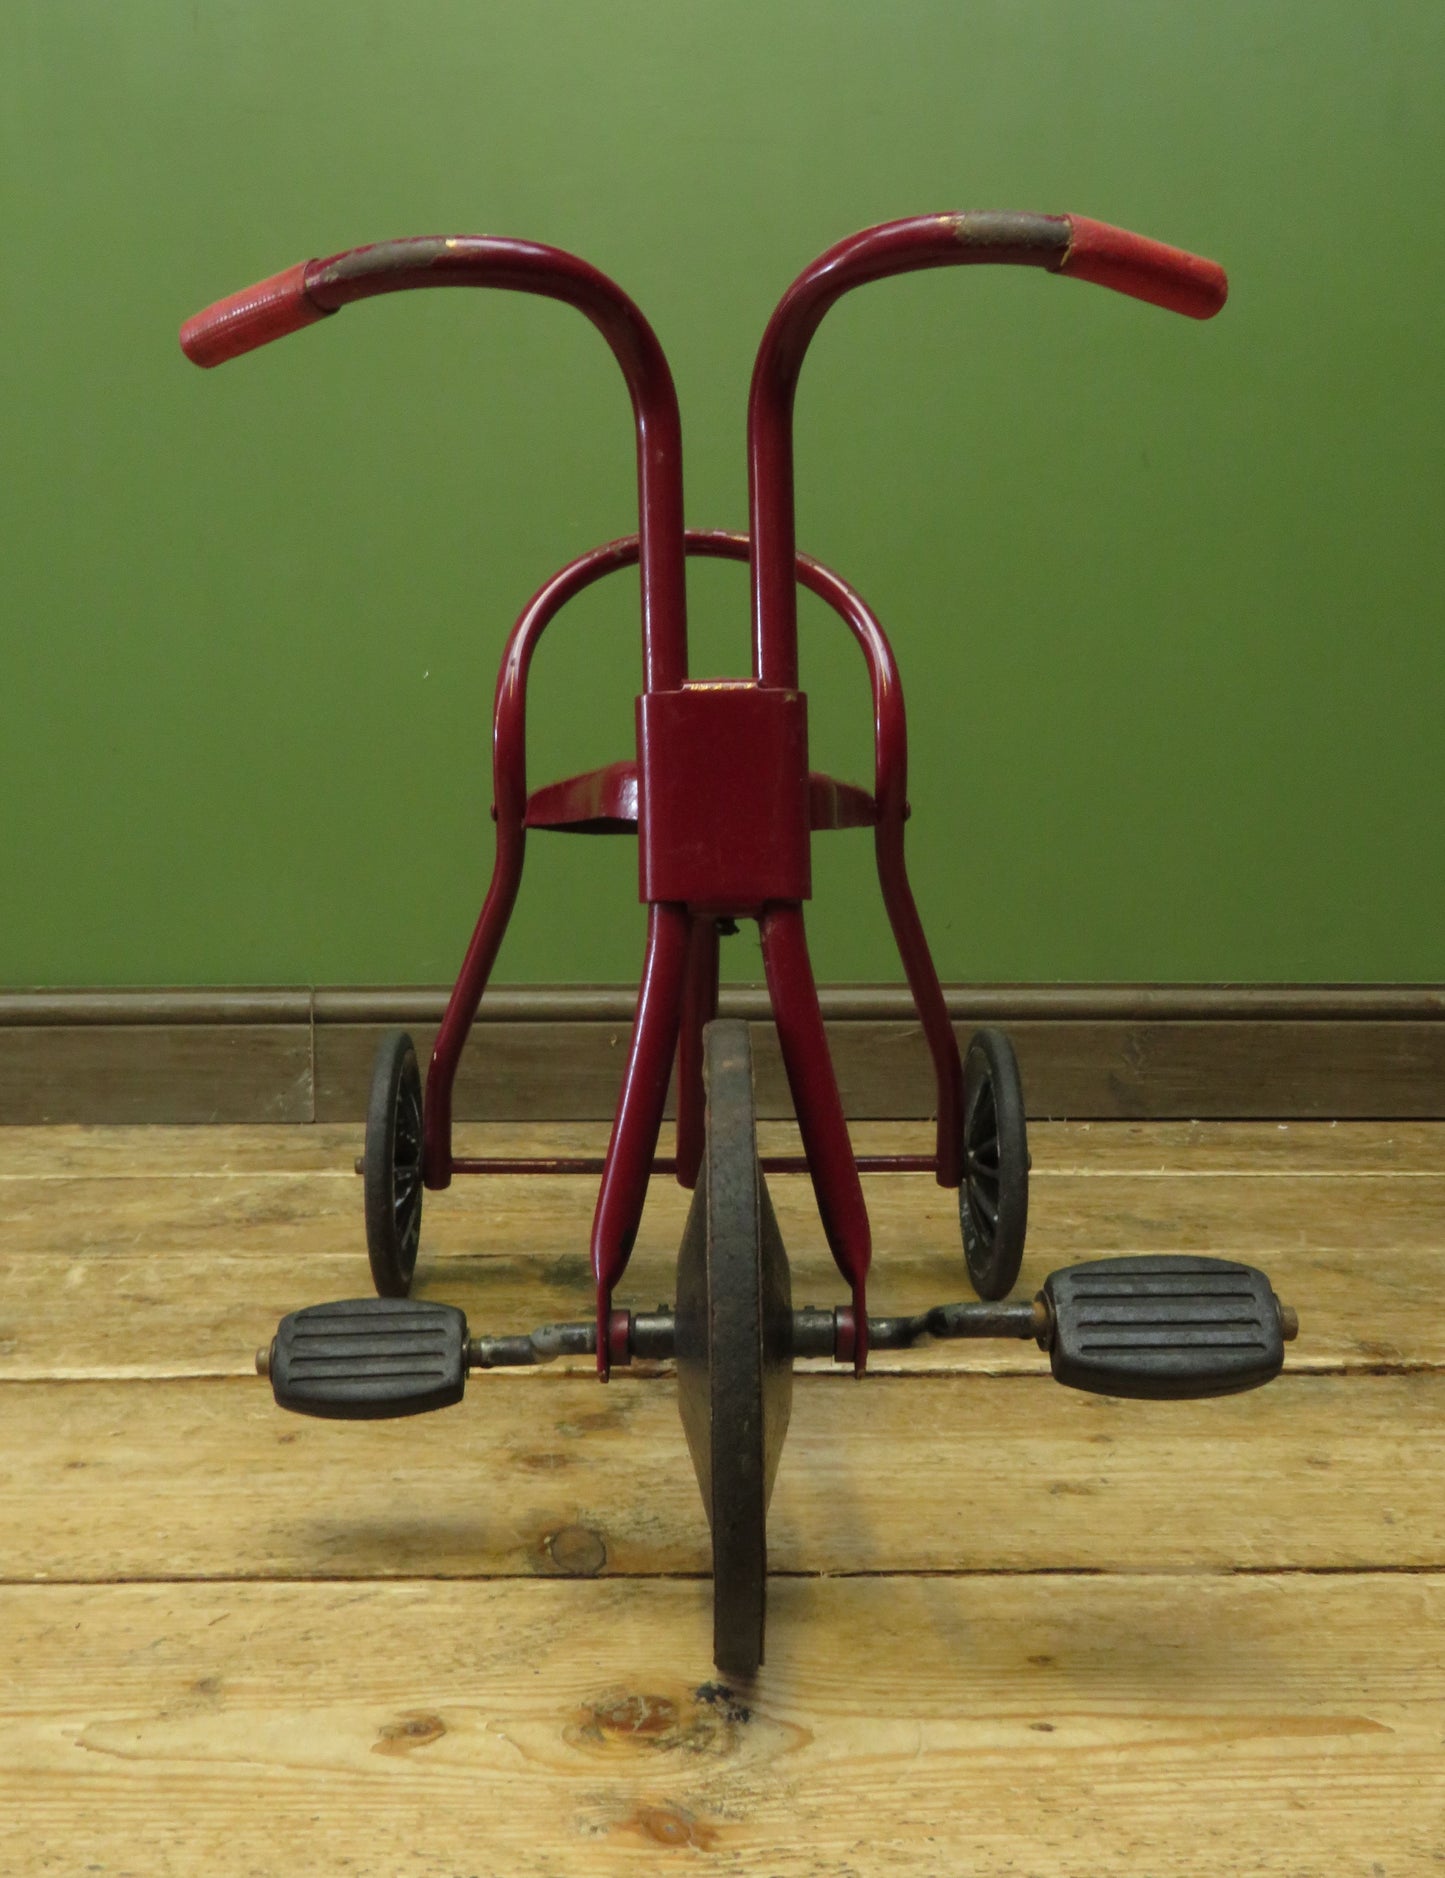 Vintage Red Raleigh Childs Tricycle